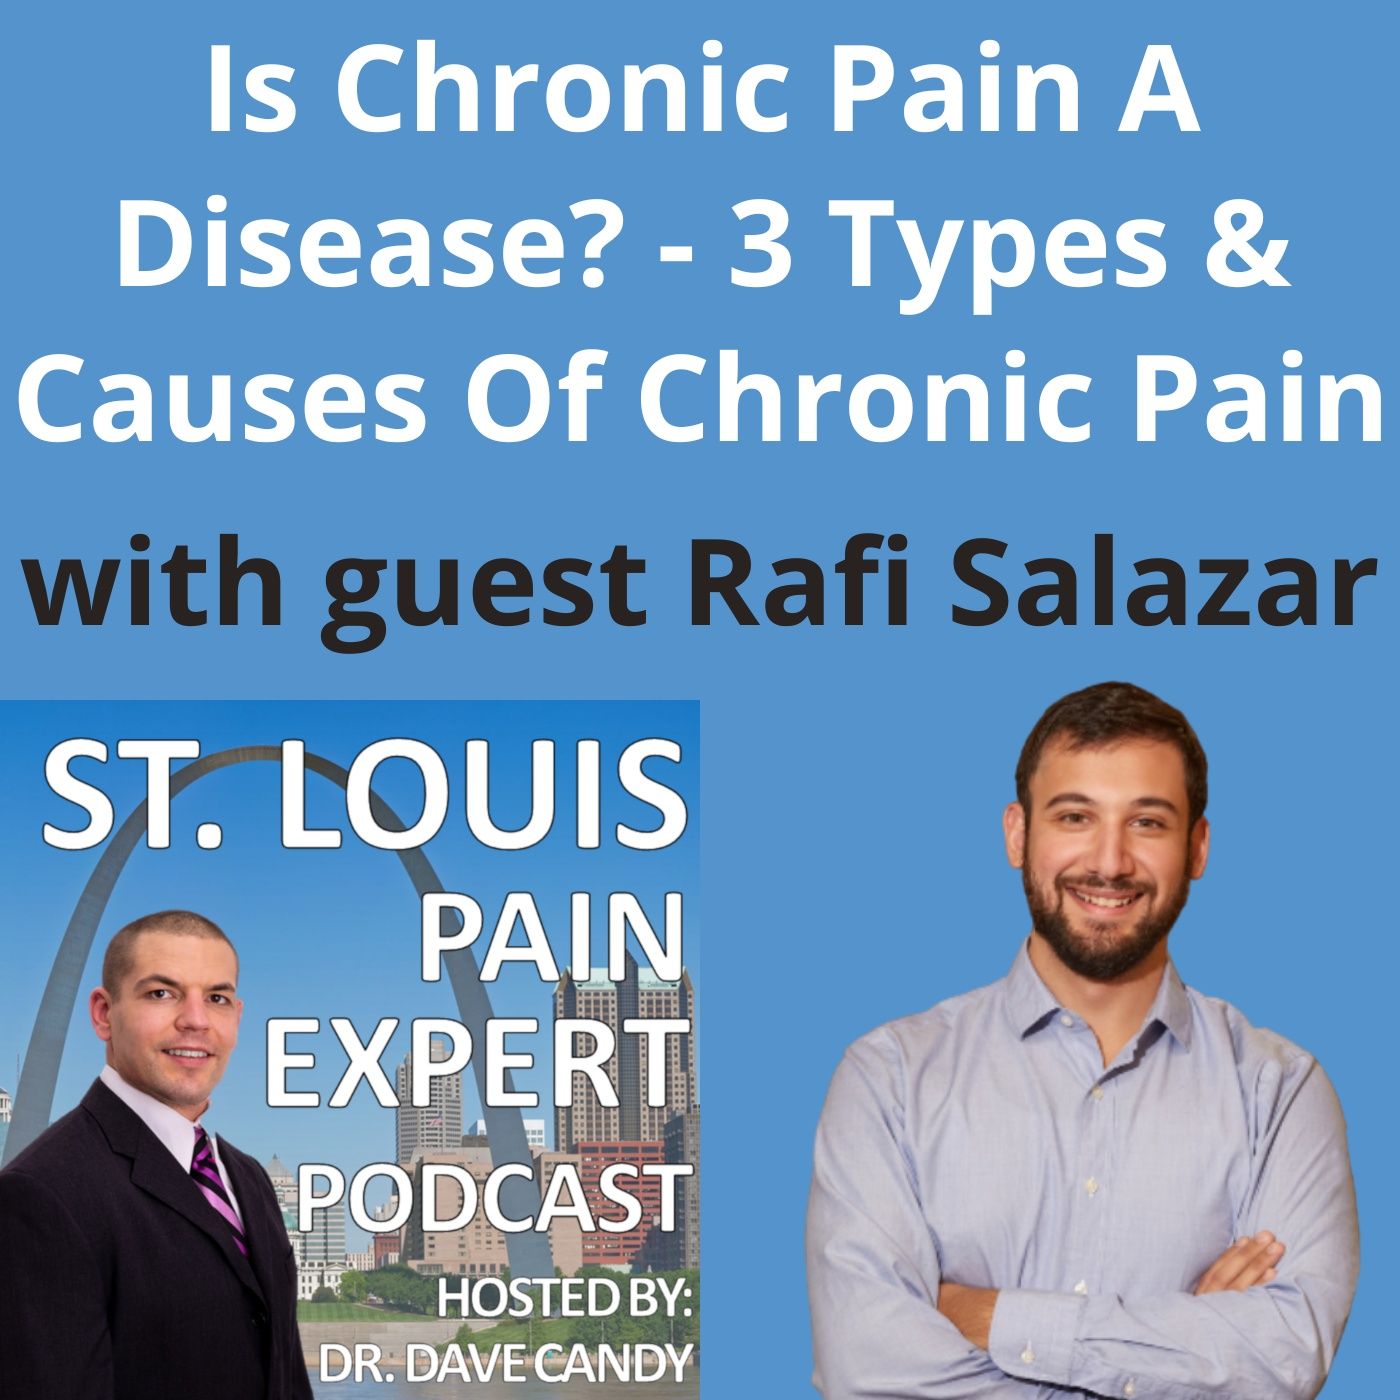 Is Chronic Pain A Disease? 3 Types Of Chronic Pain with guest Rafi Salazar